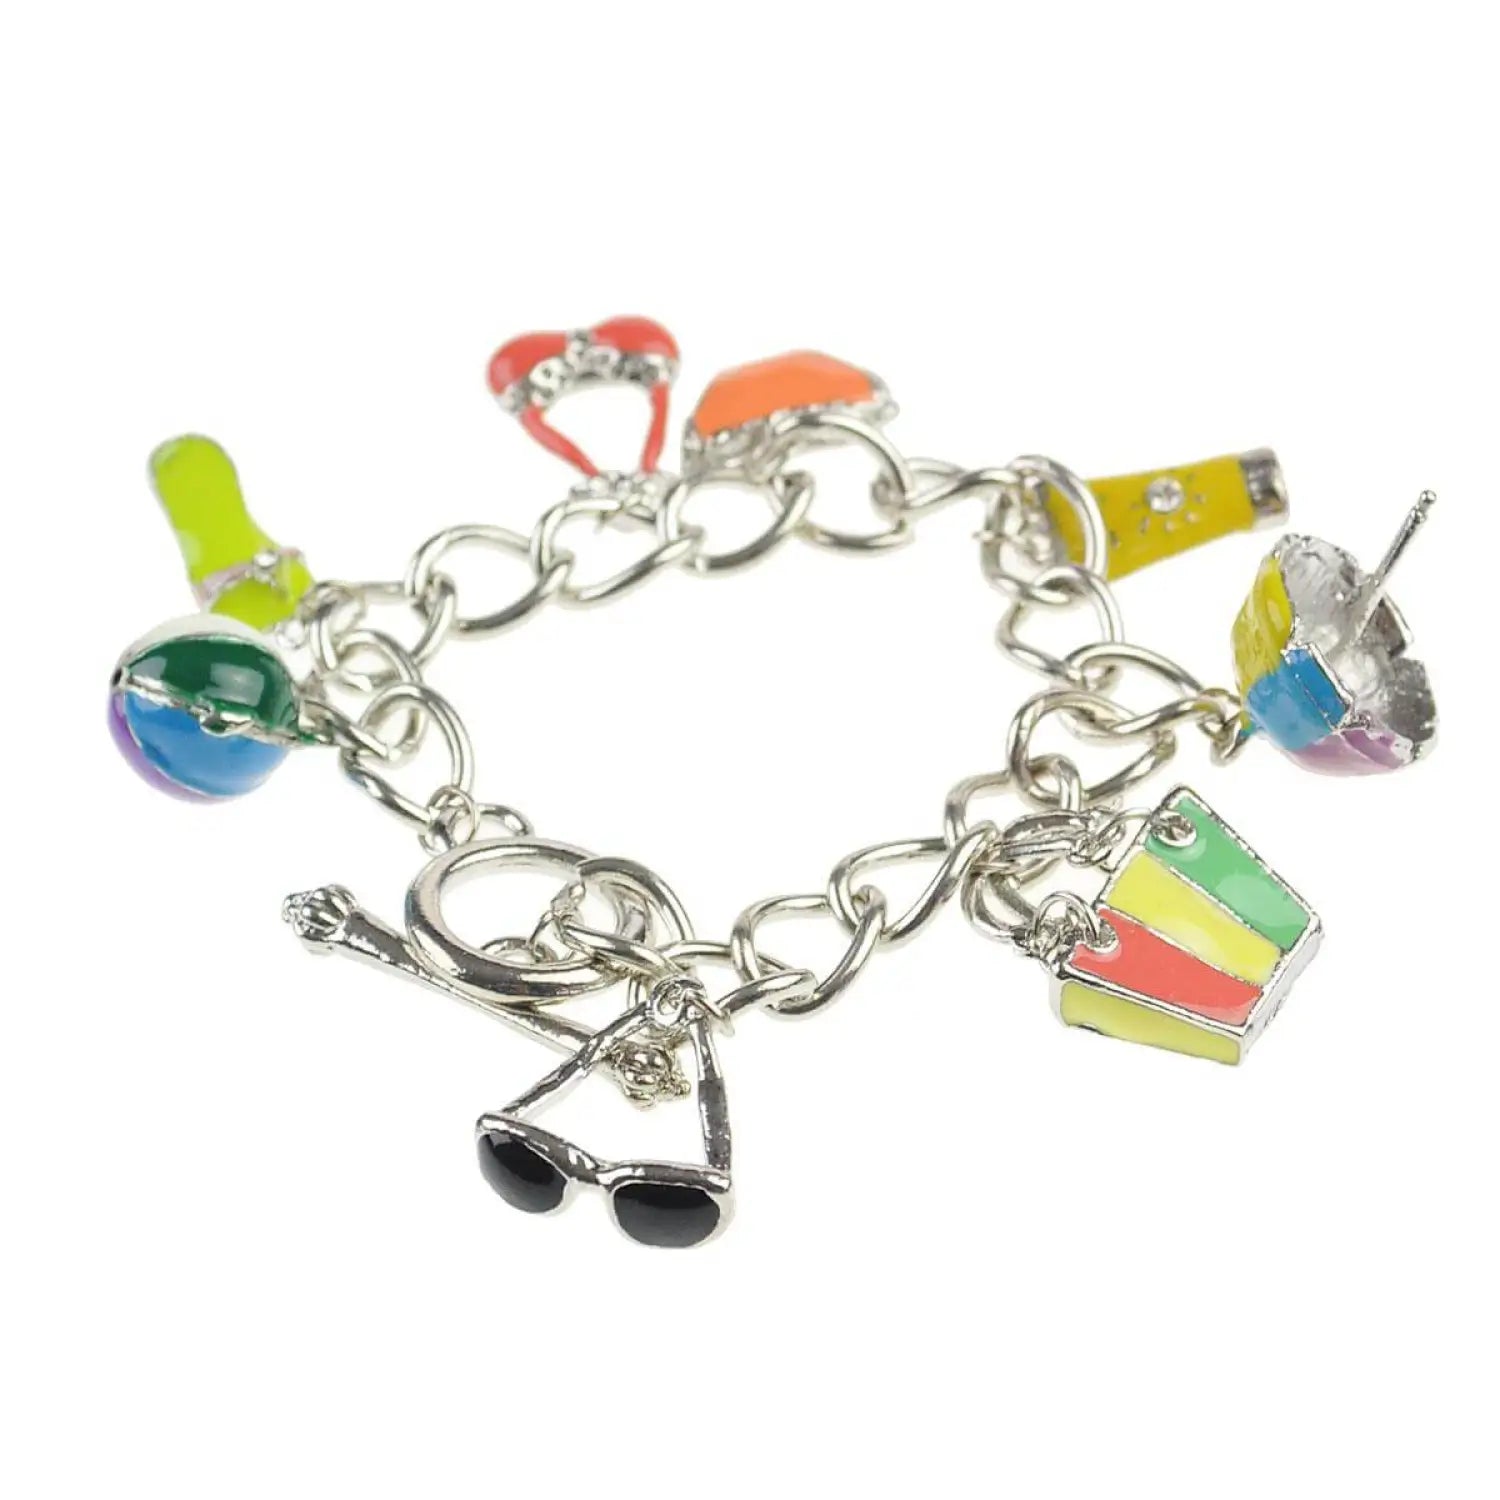 Colorful charm bracelet from 3 pack metal charm bracelets - Your Perfect Summer Accessory.